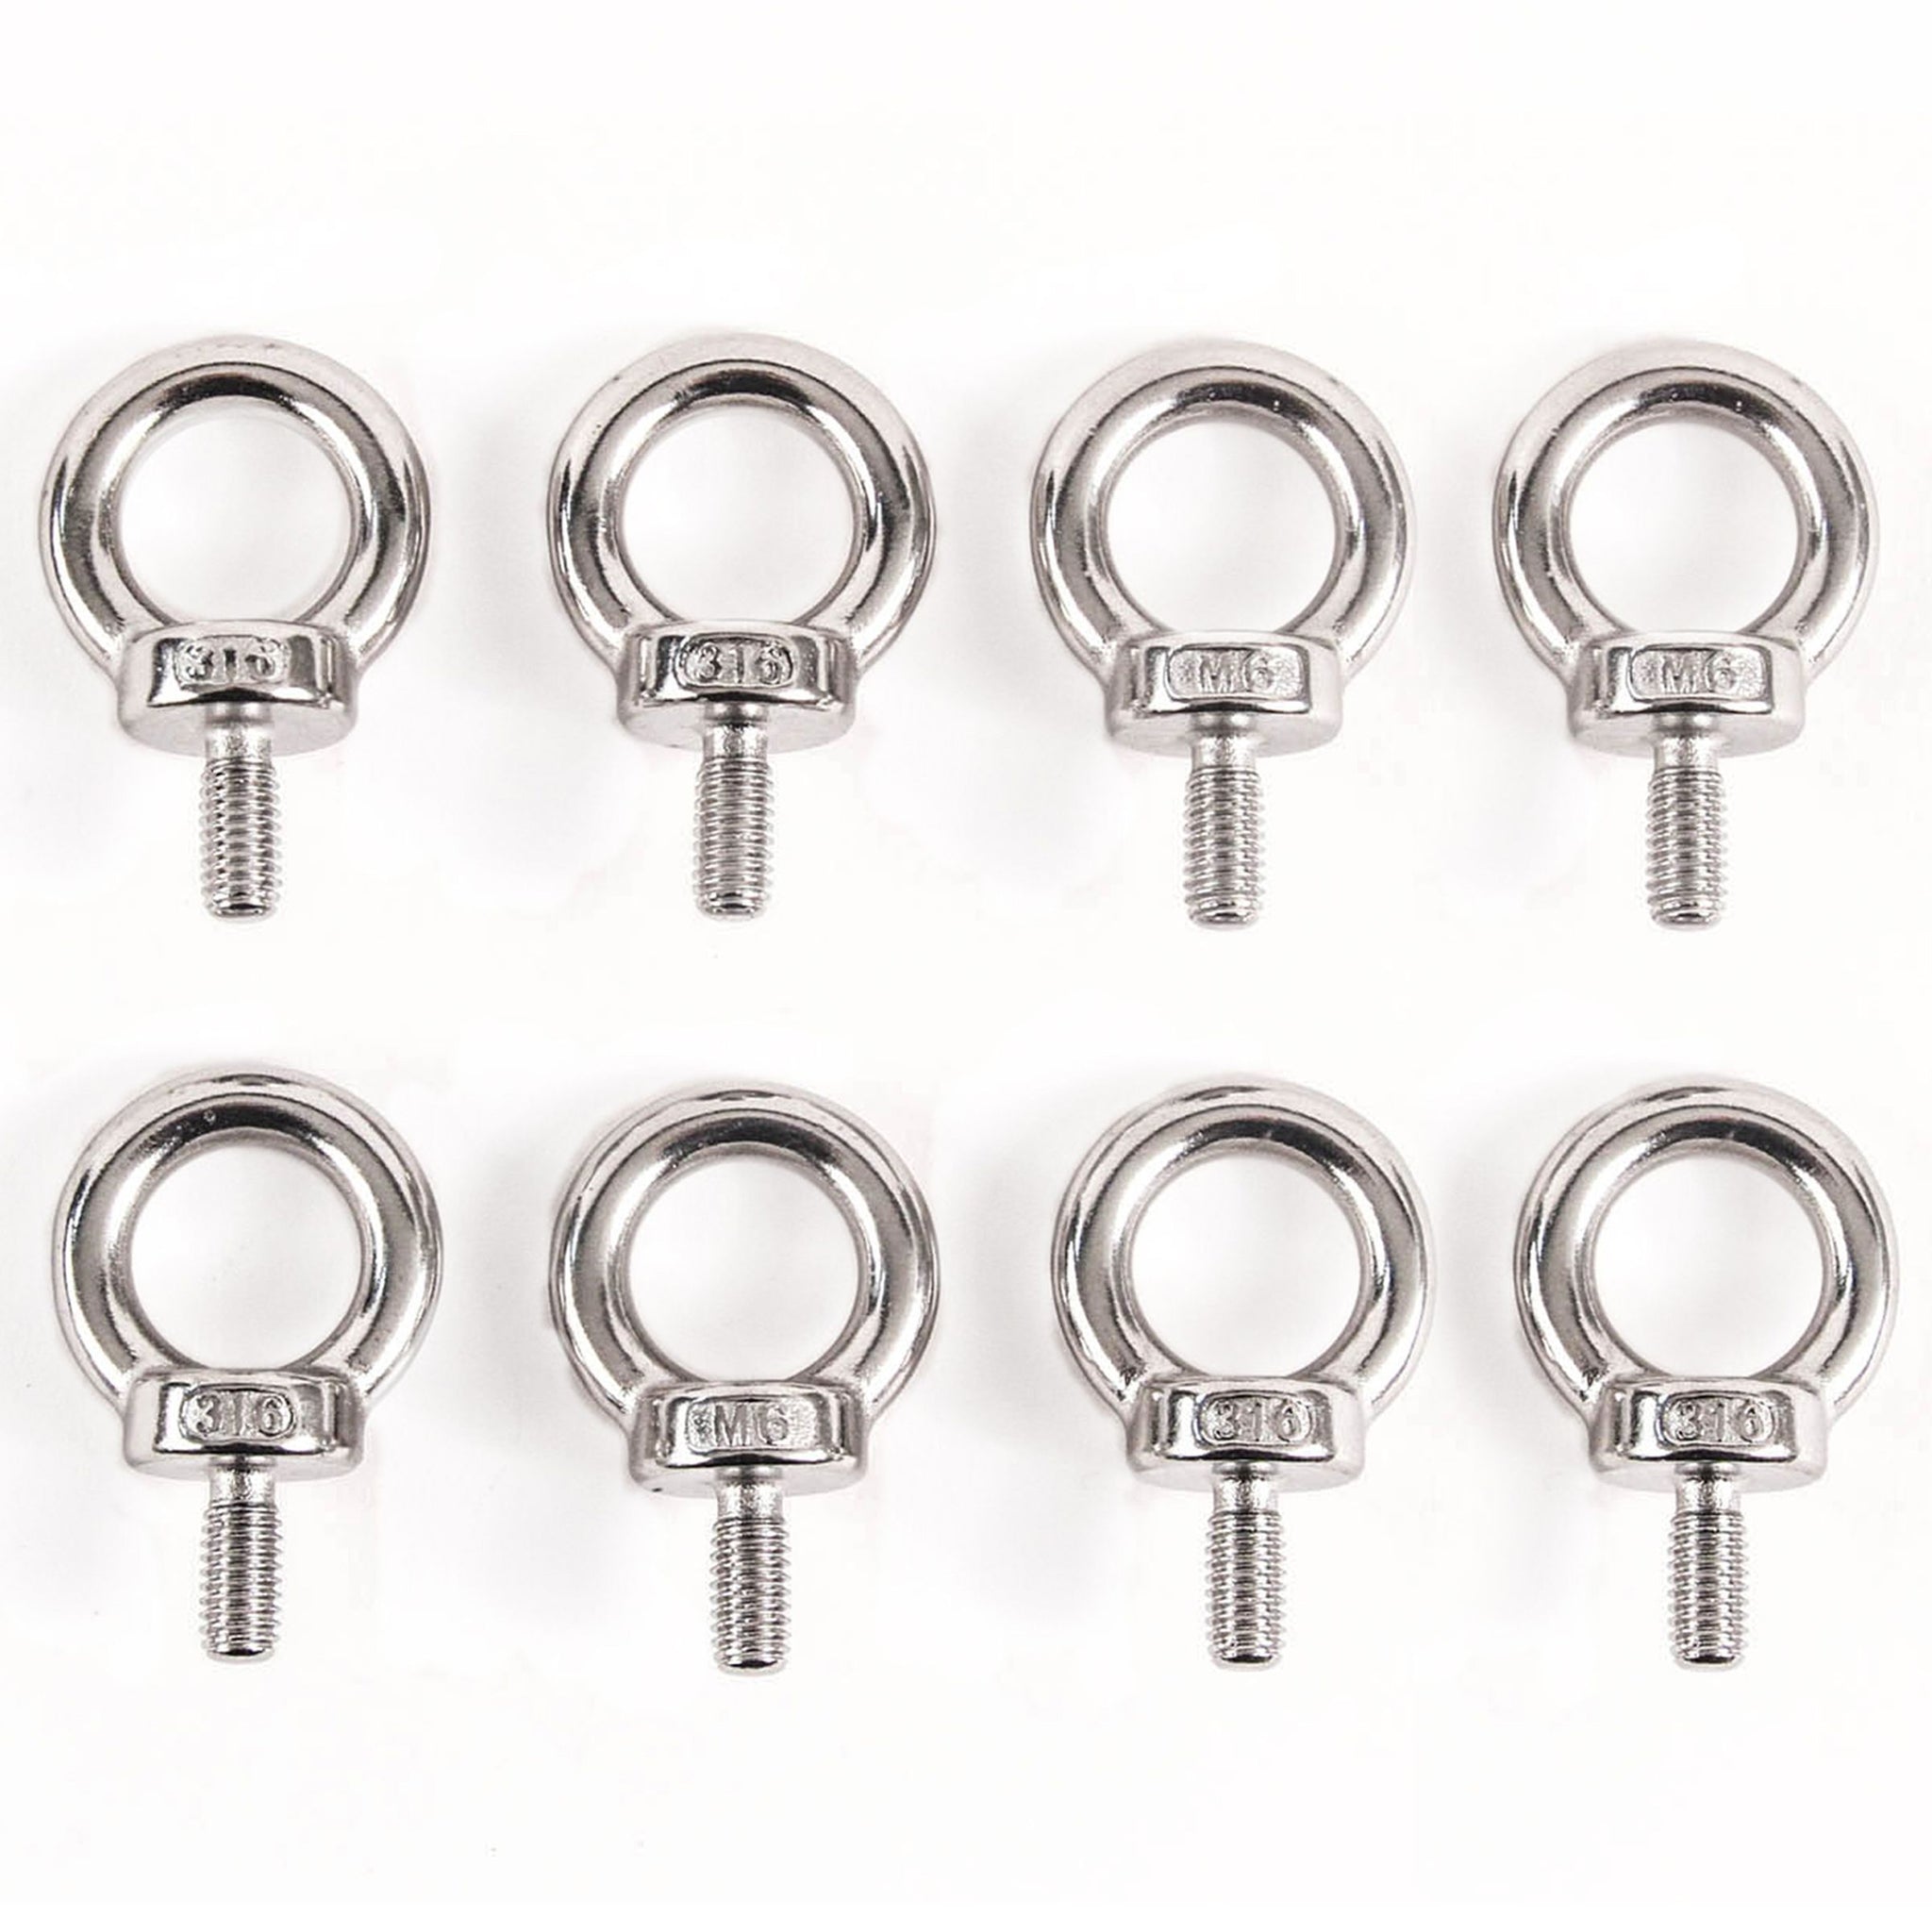 Red Hound Auto 8 Stainless Steel DIN 580 Machine Shoulder Lifting Eye Bolts M6 316SS Marine 6mm